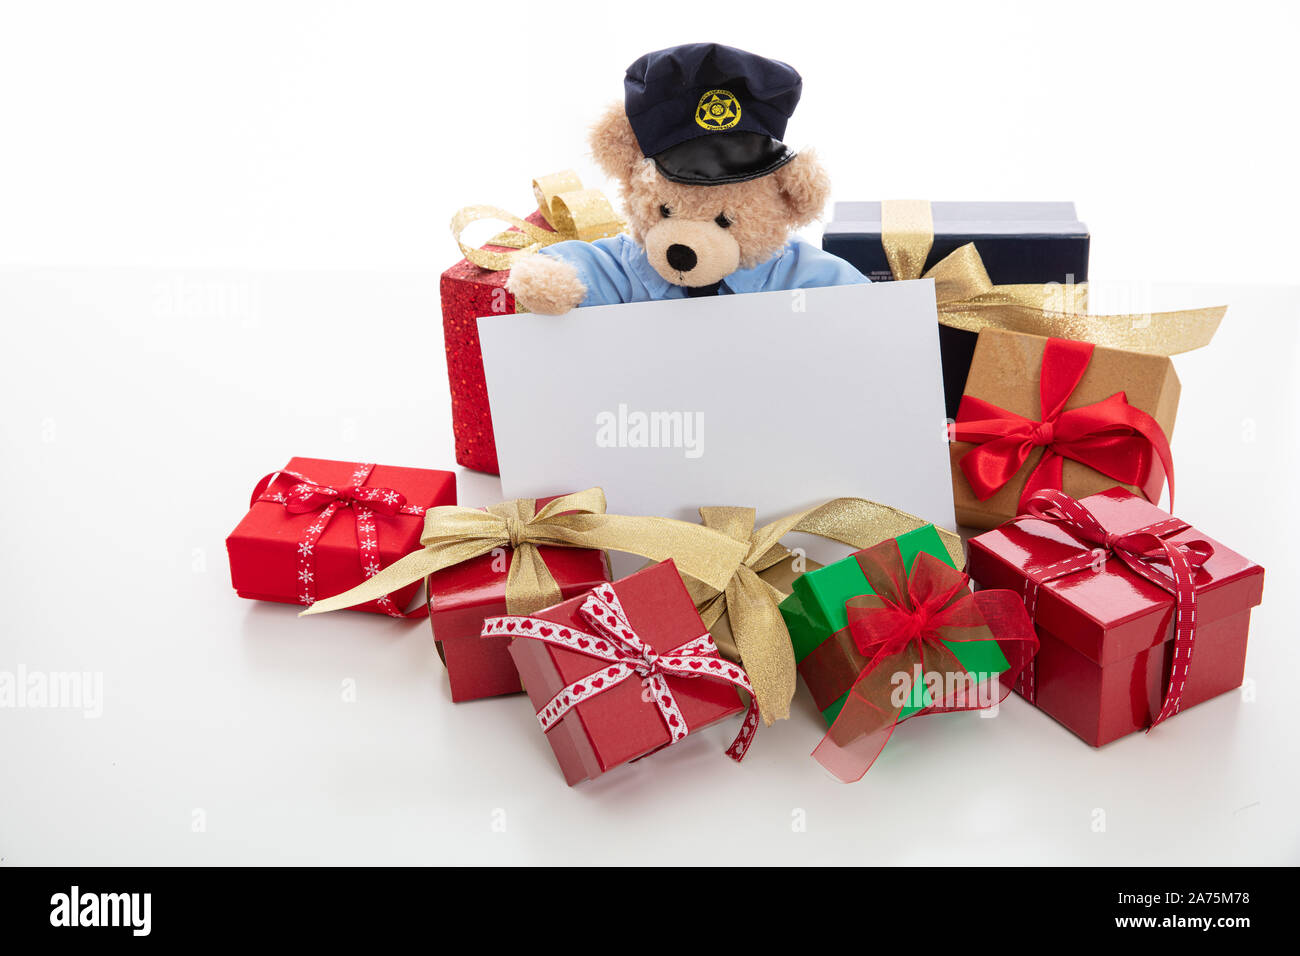 Police and christmas concept. Cute teddy bear in police officer uniform and xmas gift boxes isolated against white background, copy space Stock Photo